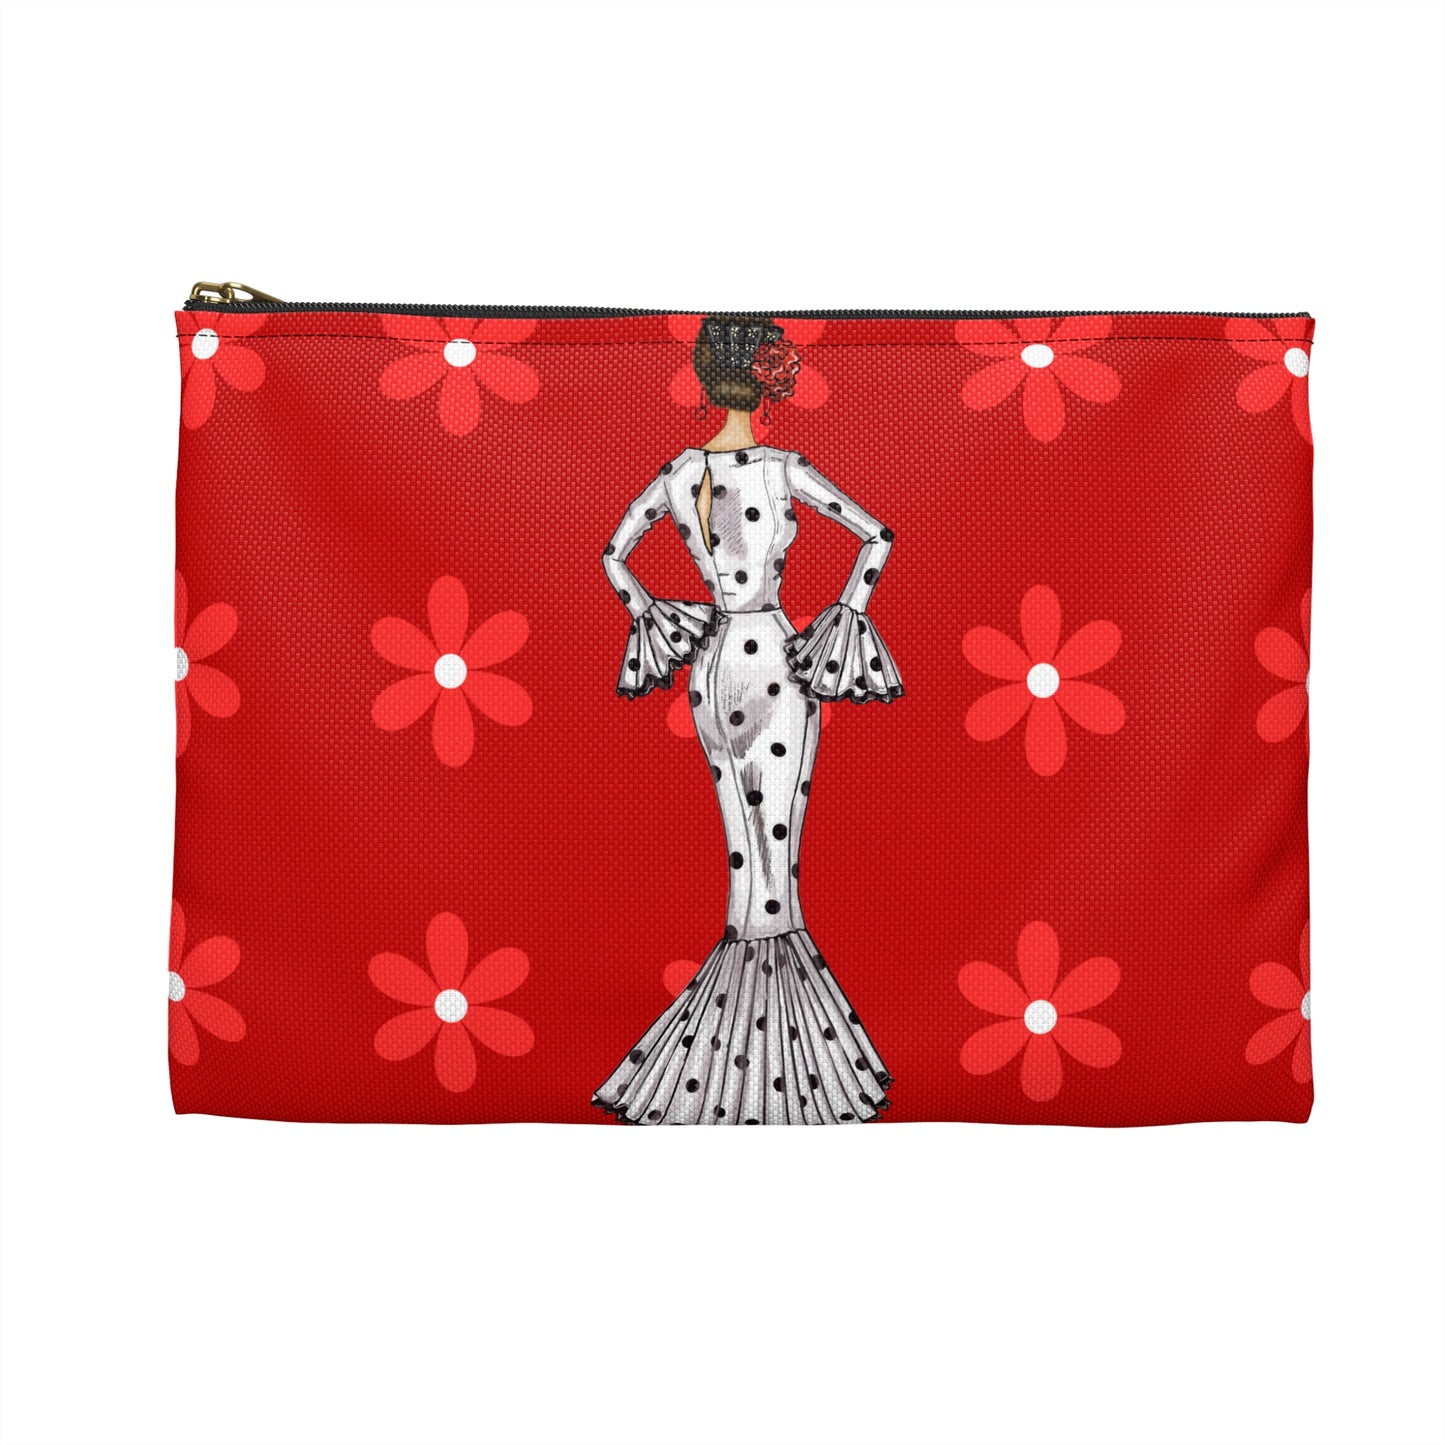 a red and white purse with a lady in a polka dot dress